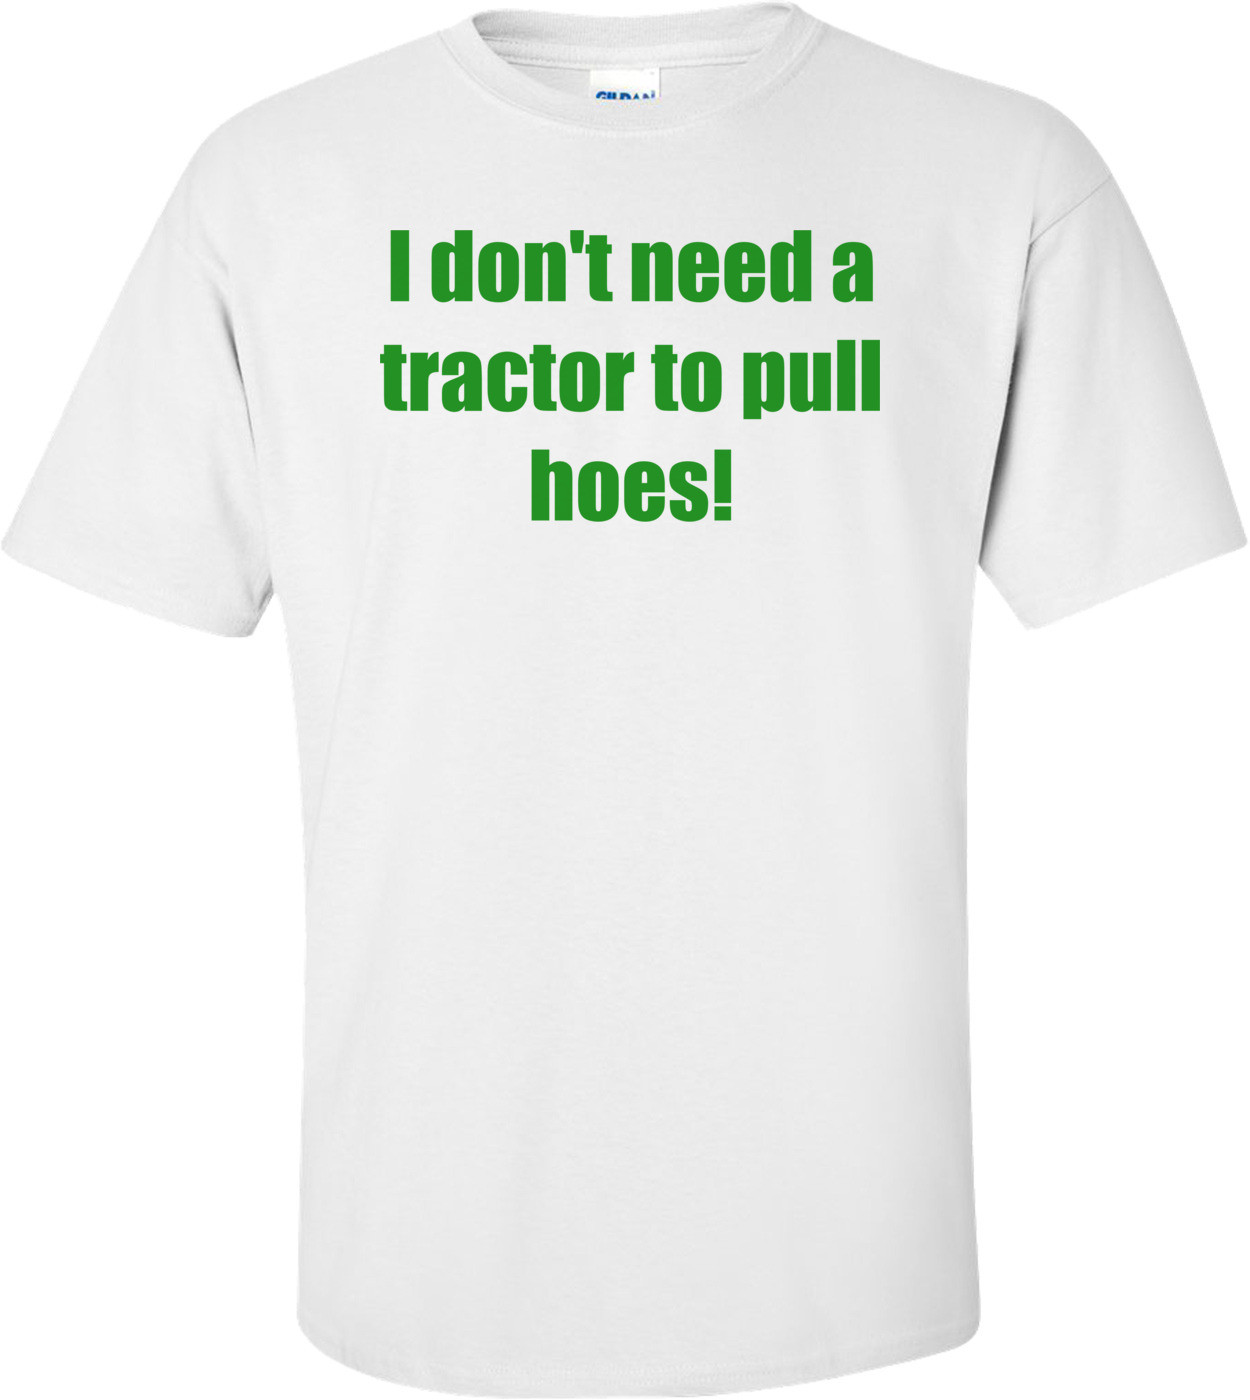 I don't need a tractor to pull hoes!